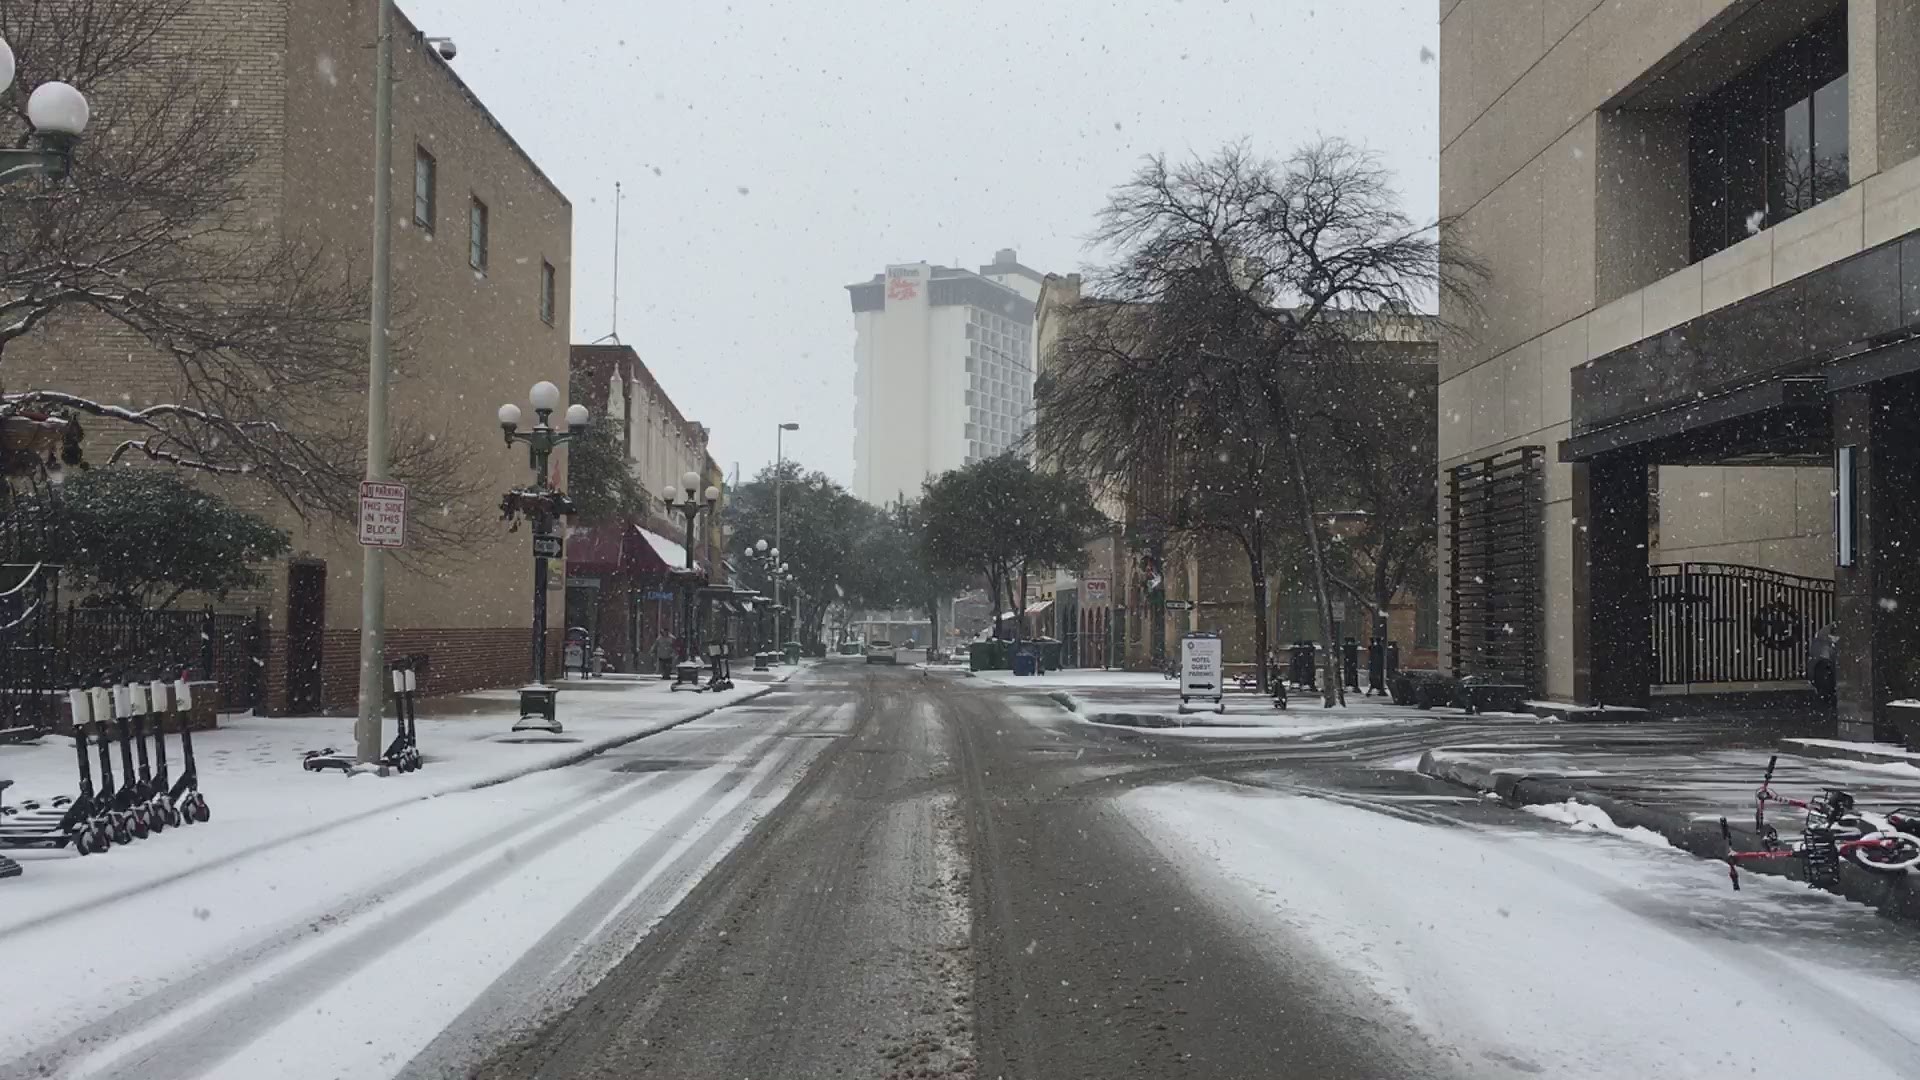 Check out the snow falling in downtown San Antonio! The snow is blanketing the ground.